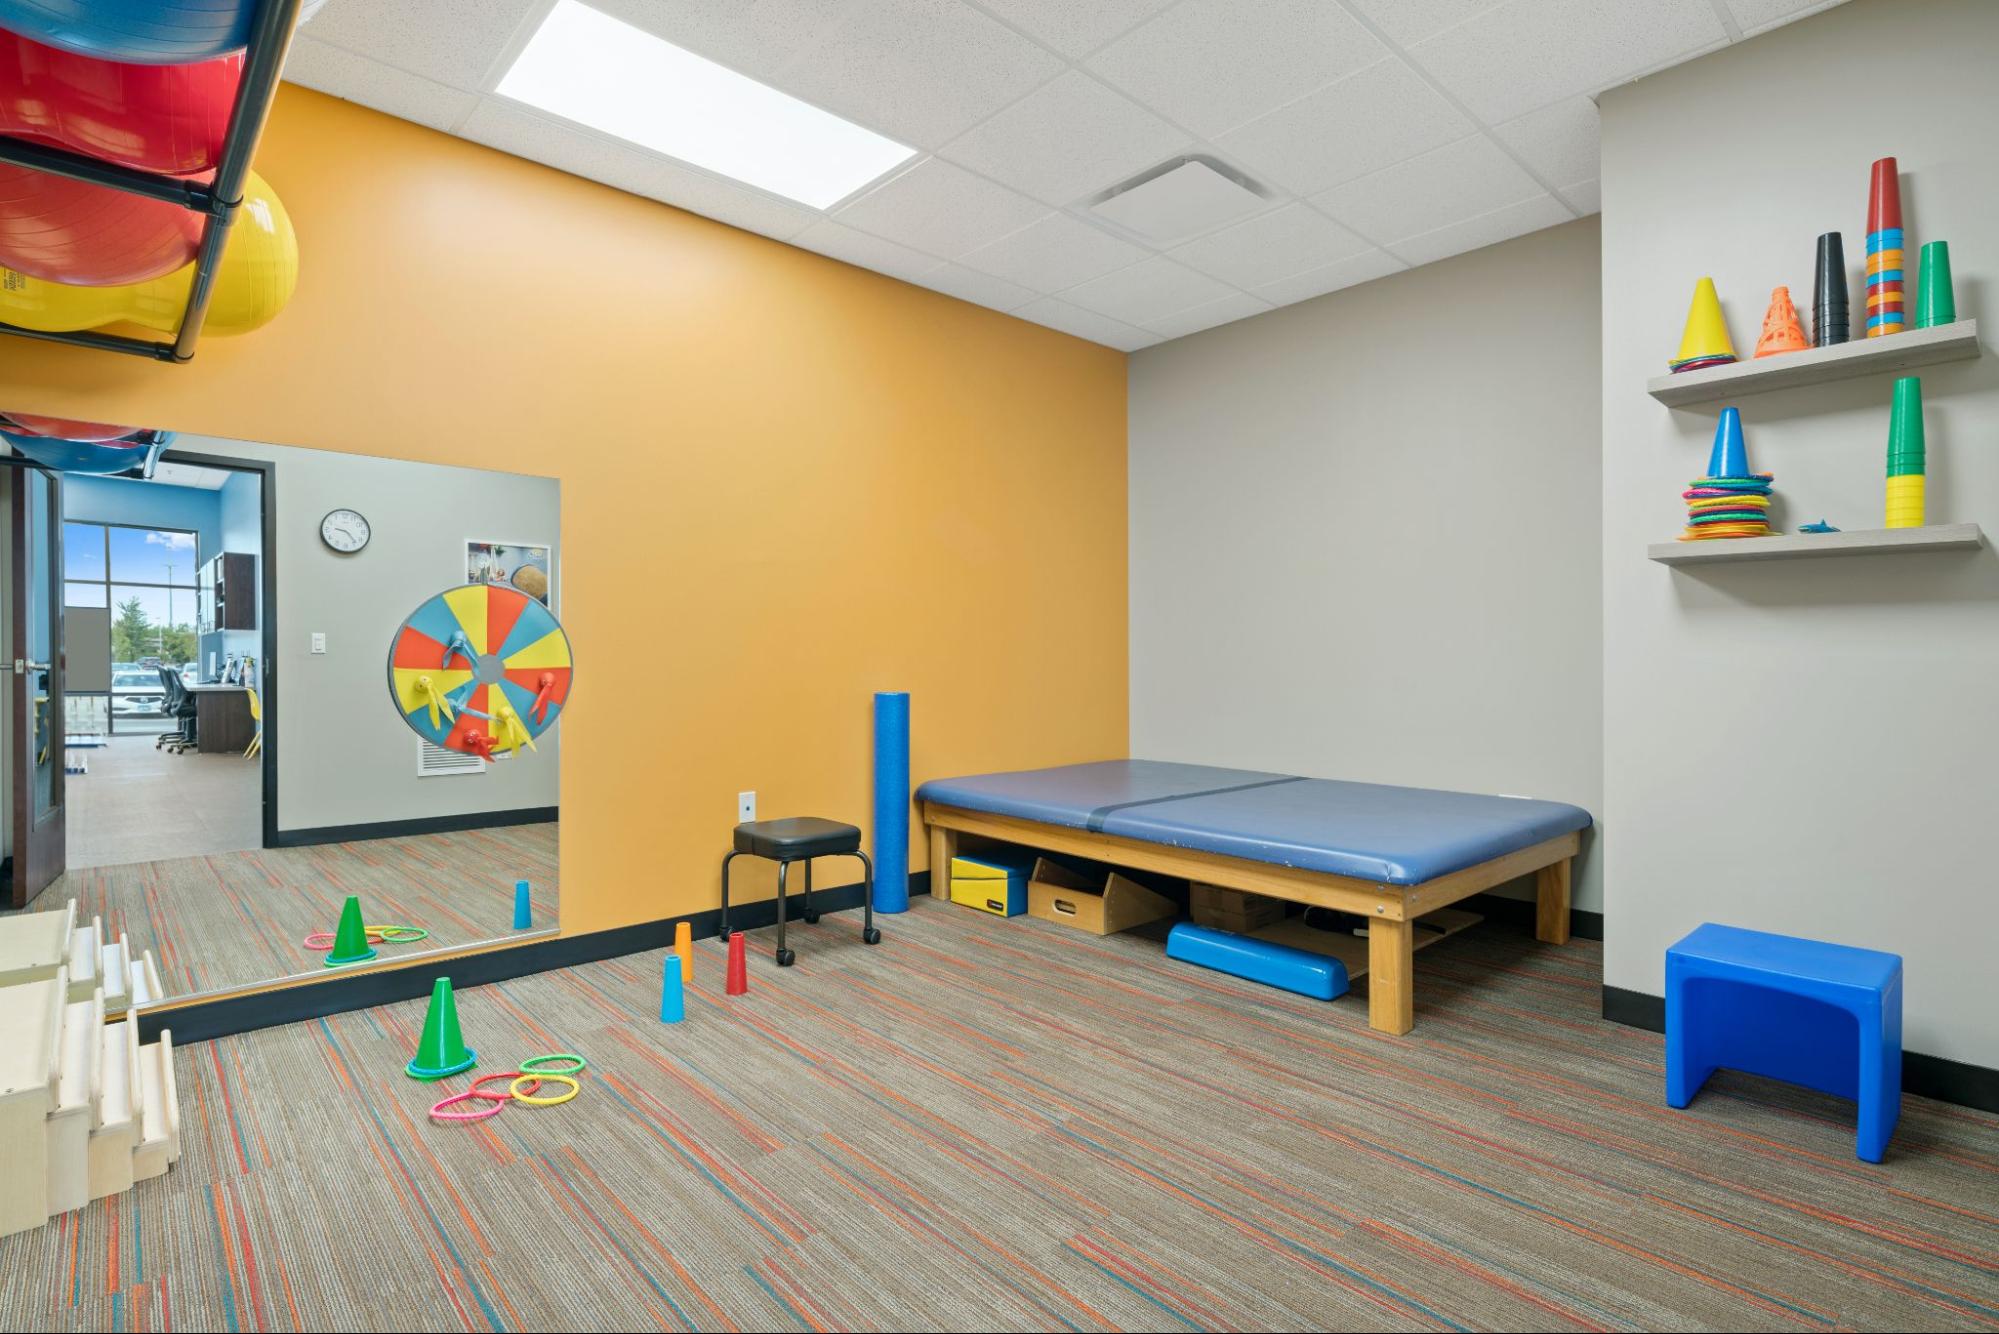 pediatric physical therapy room at Westside Children's Therapy in Illinois